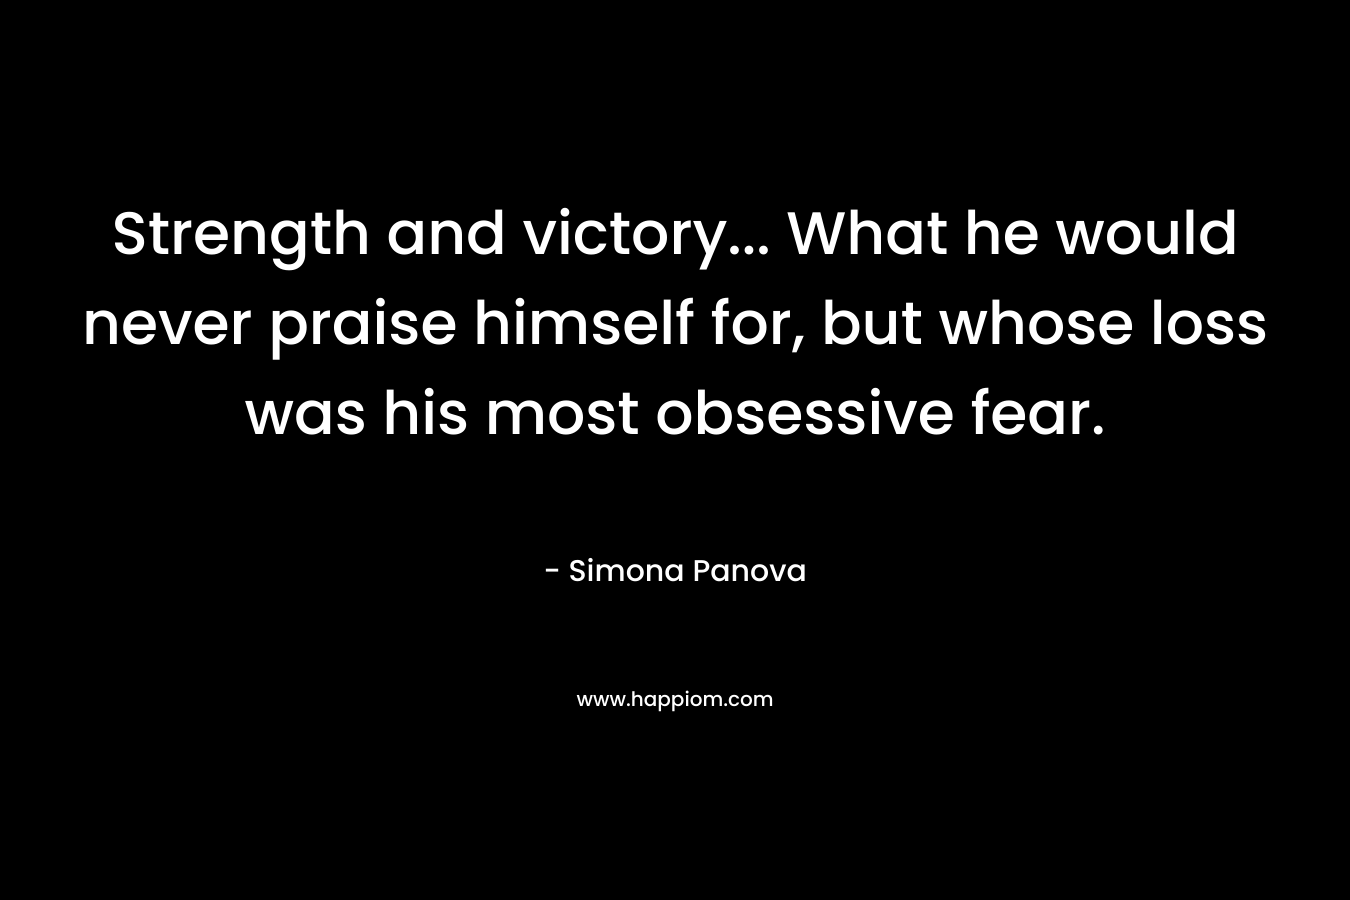 Strength and victory... What he would never praise himself for, but whose loss was his most obsessive fear.